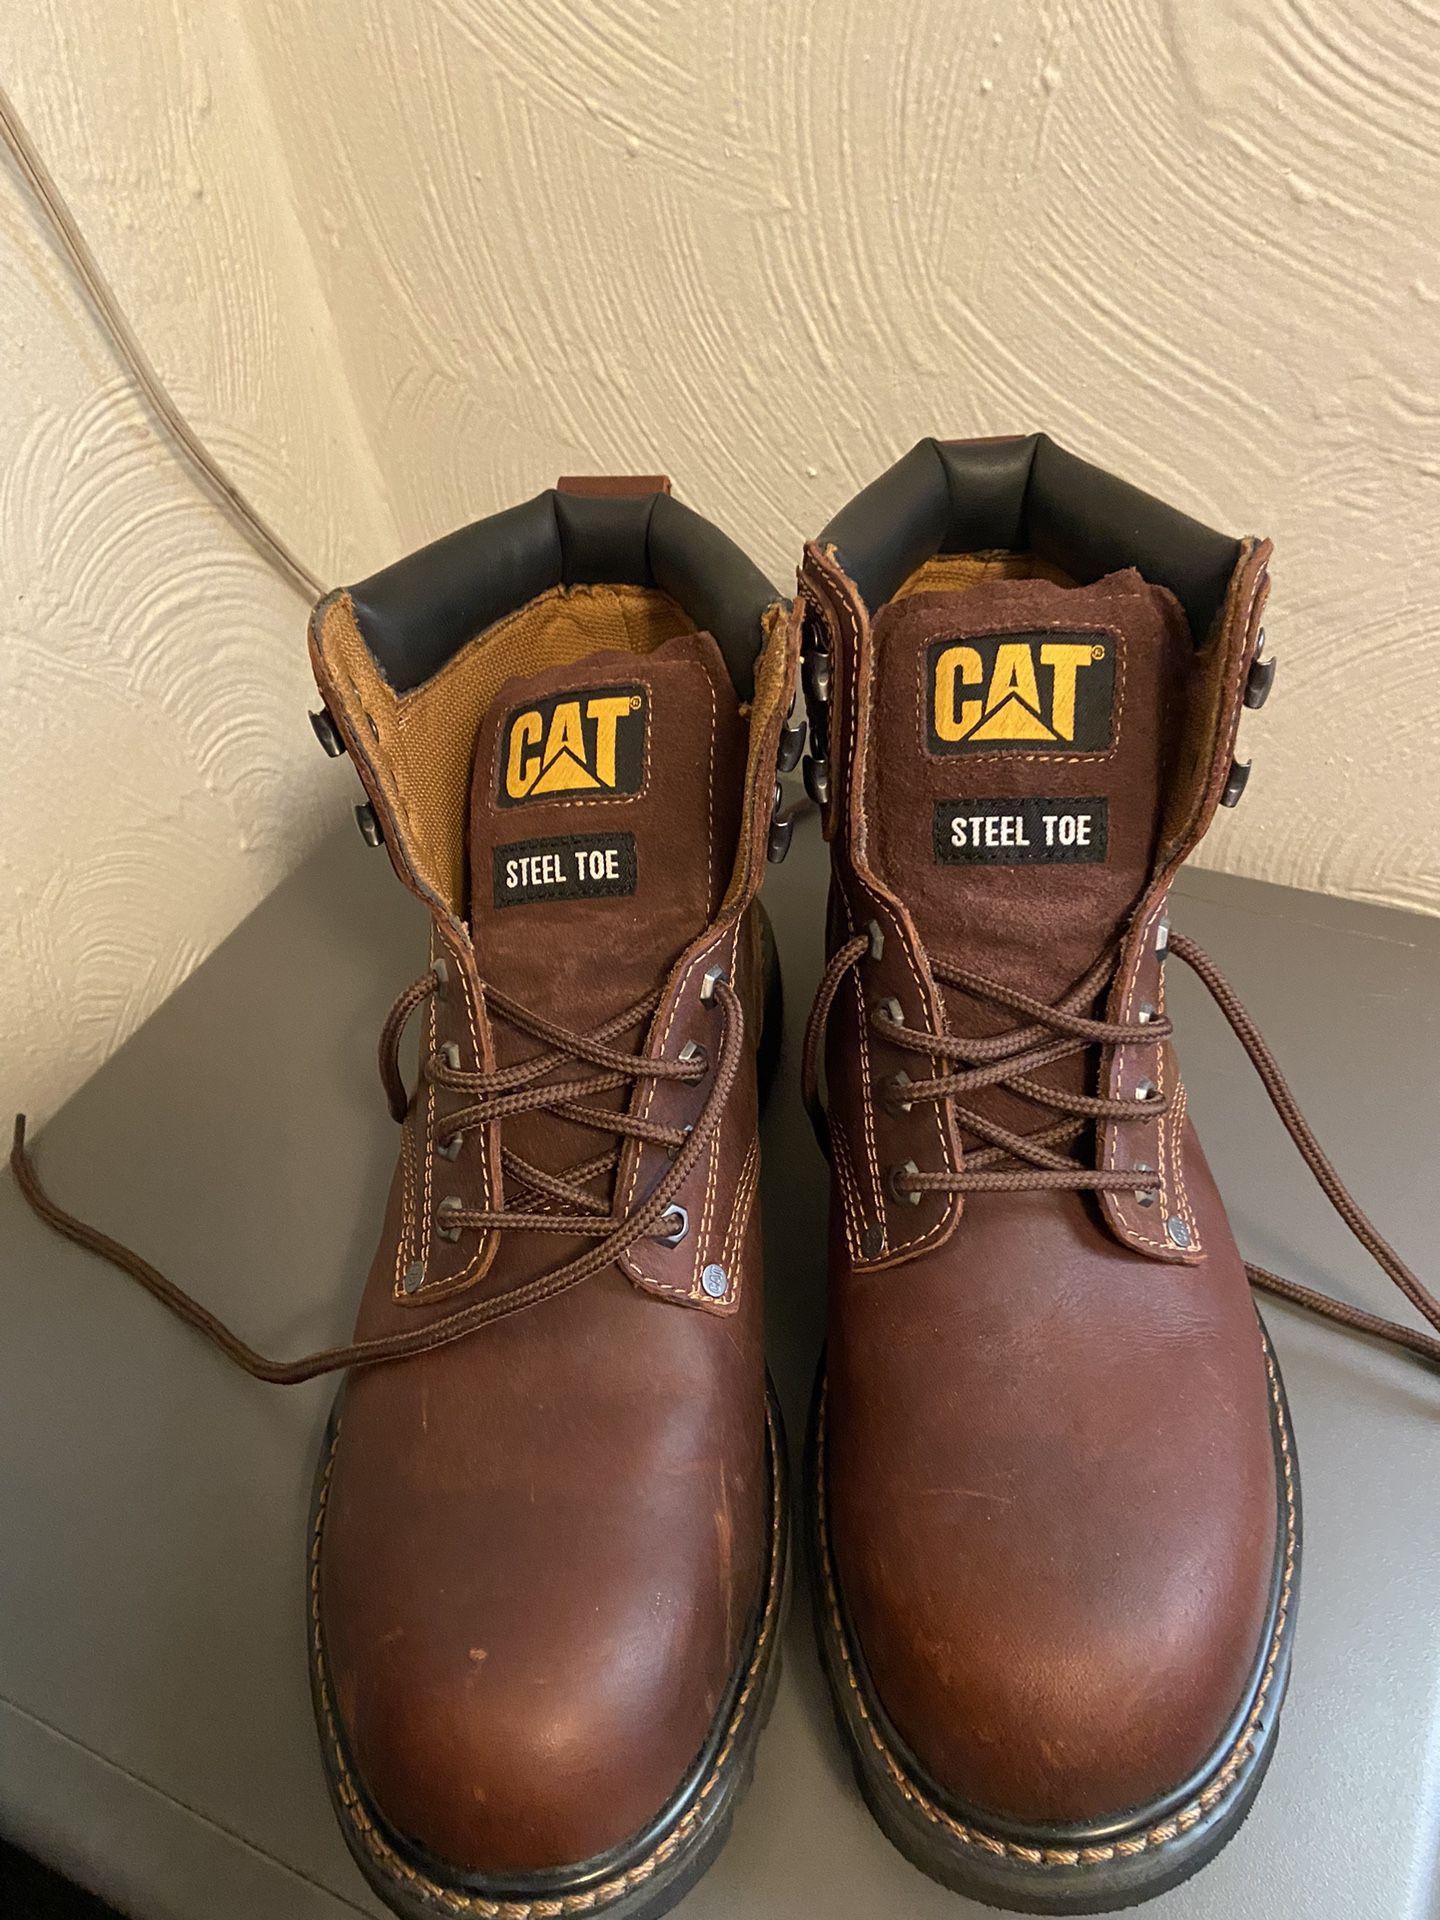 CAT Work Boots New for Sale in Seattle, WA - OfferUp